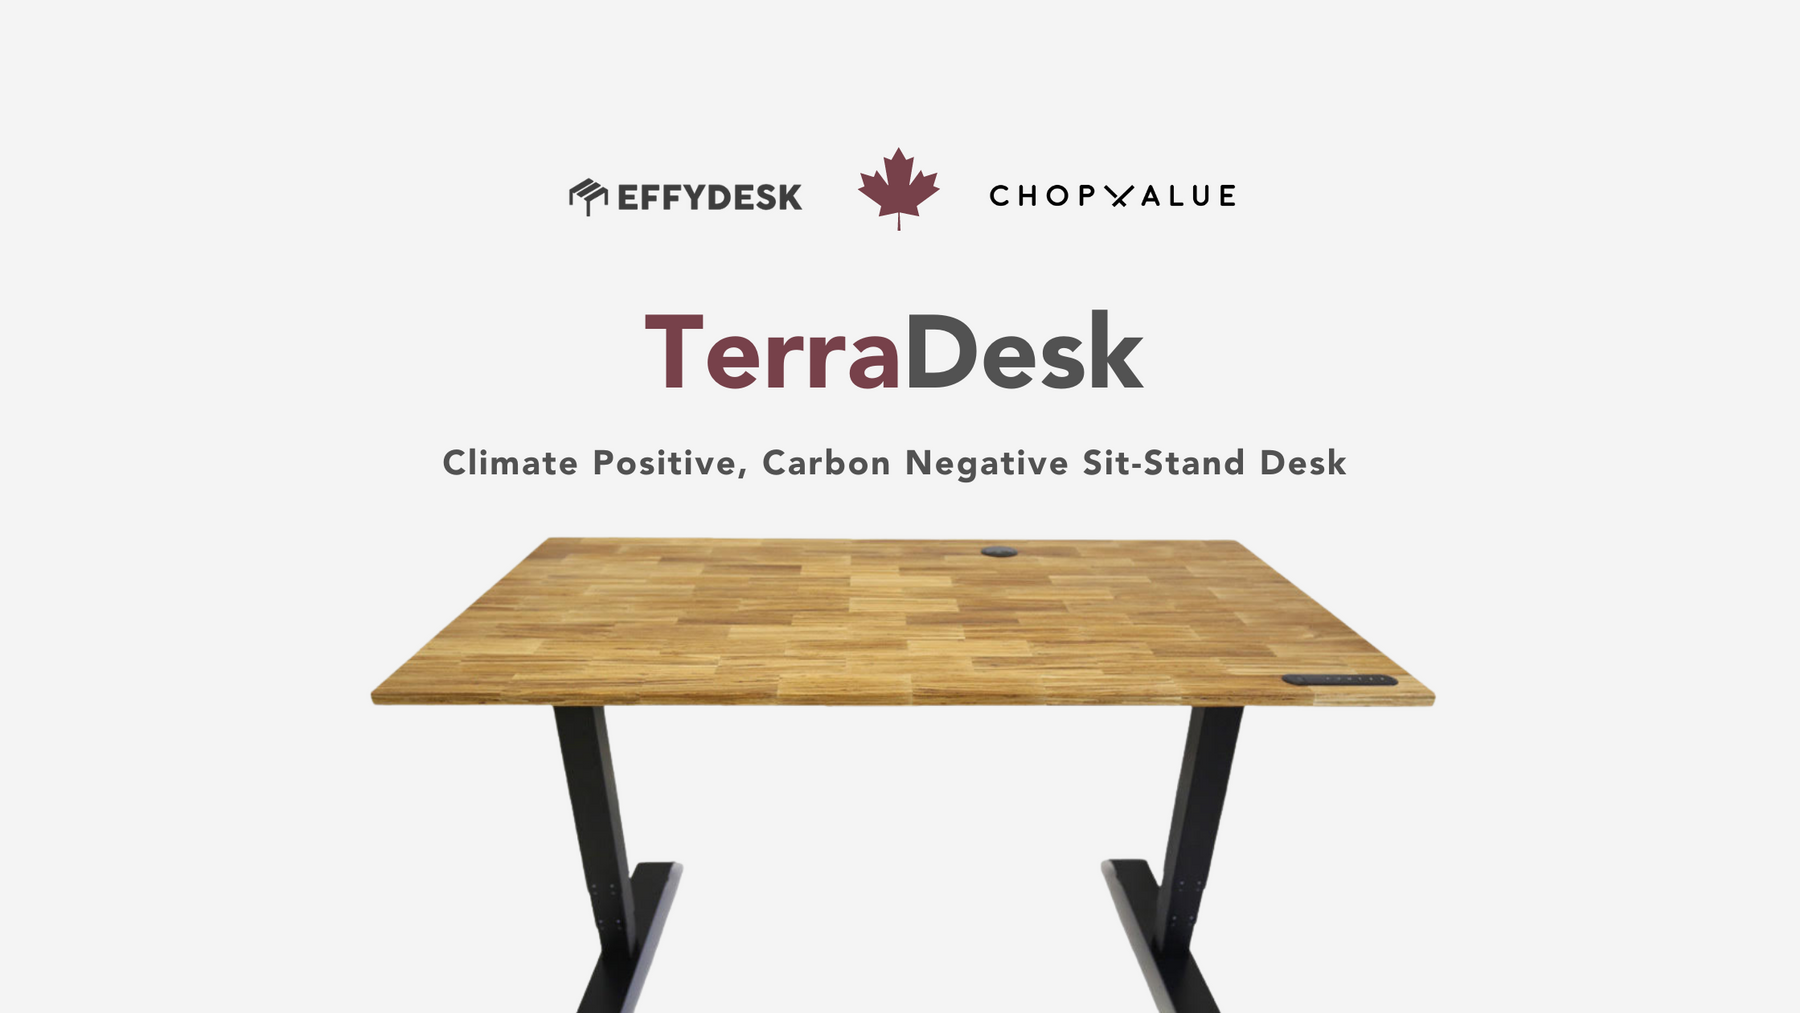 A climate positive TerraDesk is available now to order online on effydesk website